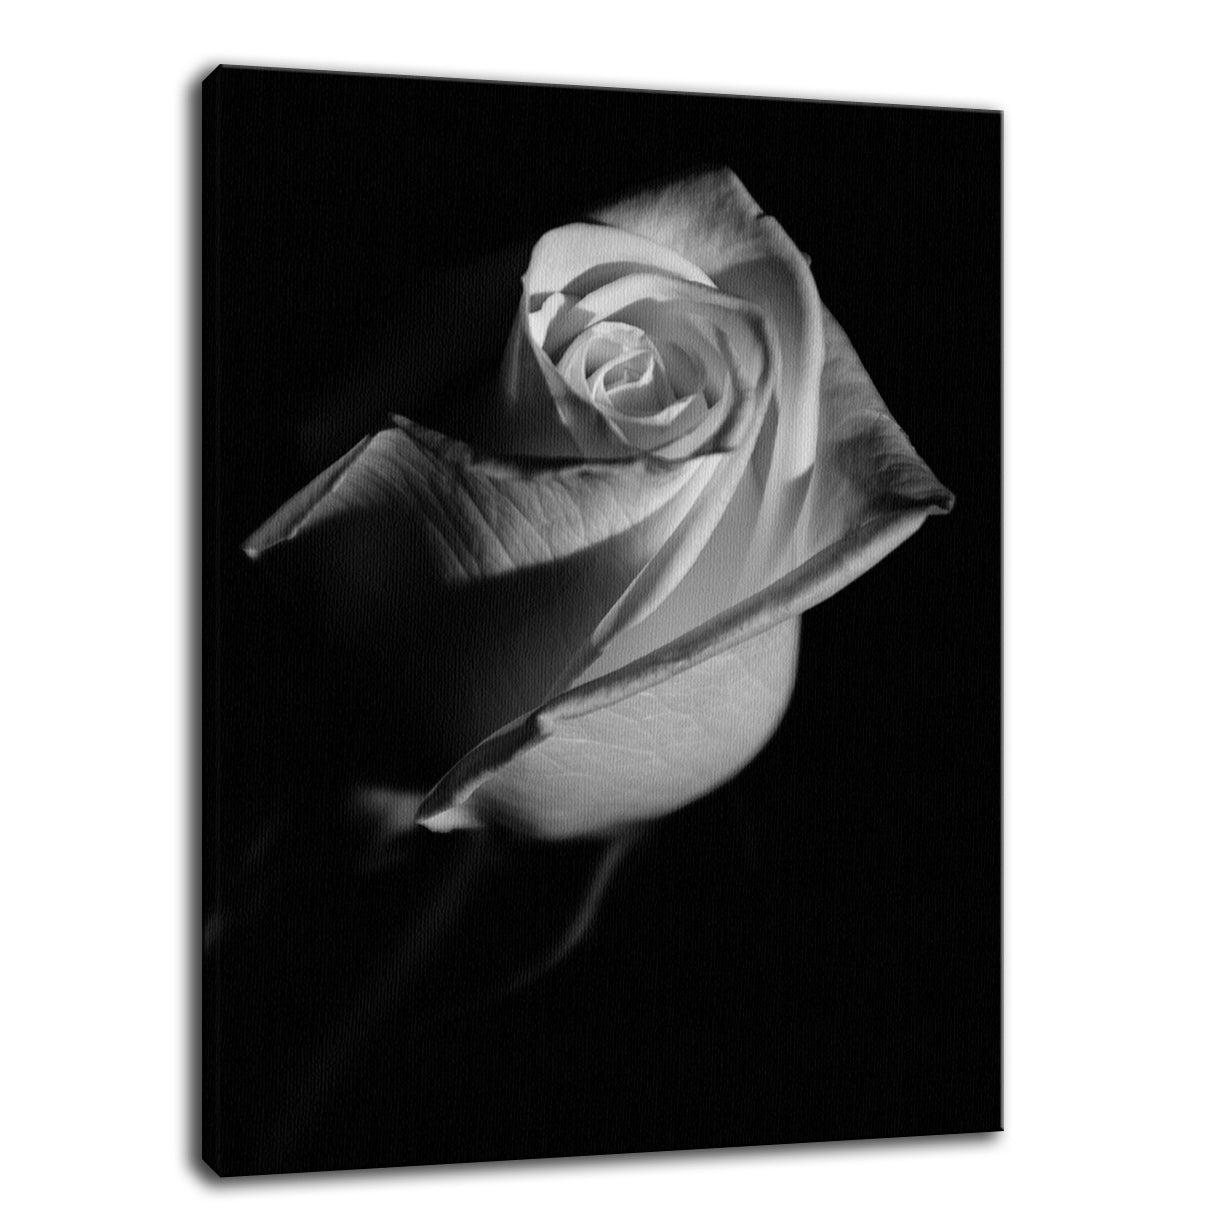 Rose on Black Black & White Nature / Floral Photo Fine Art Canvas Wall Art Prints  - PIPAFINEART